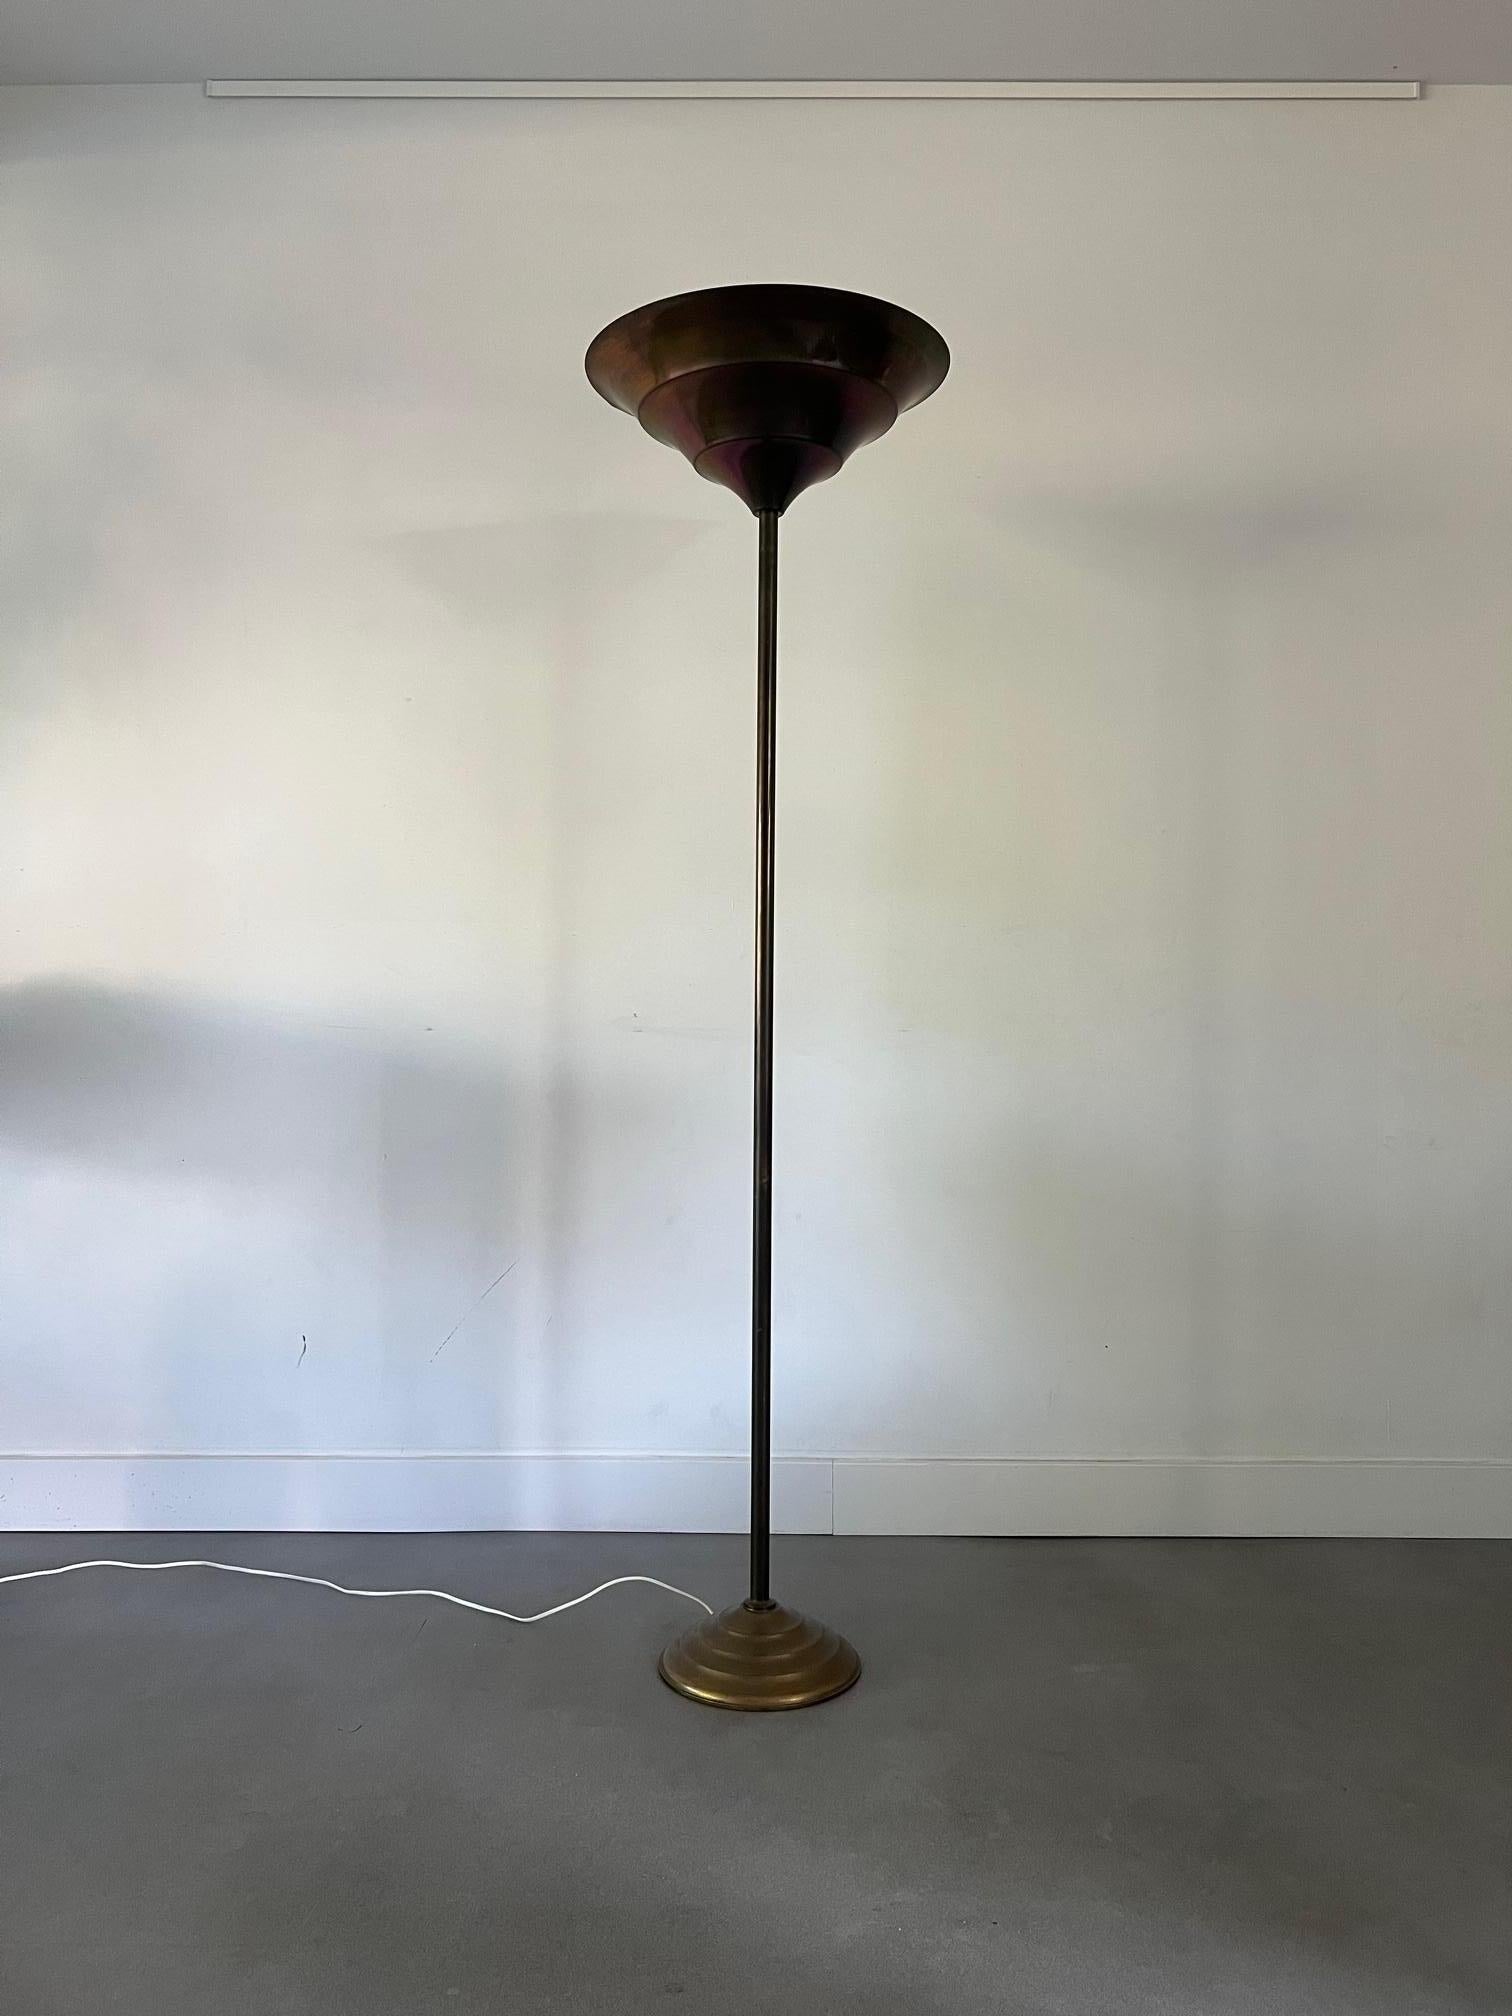 Art Deco Big brass uplighter floorlamp with casted foot 20's/30's